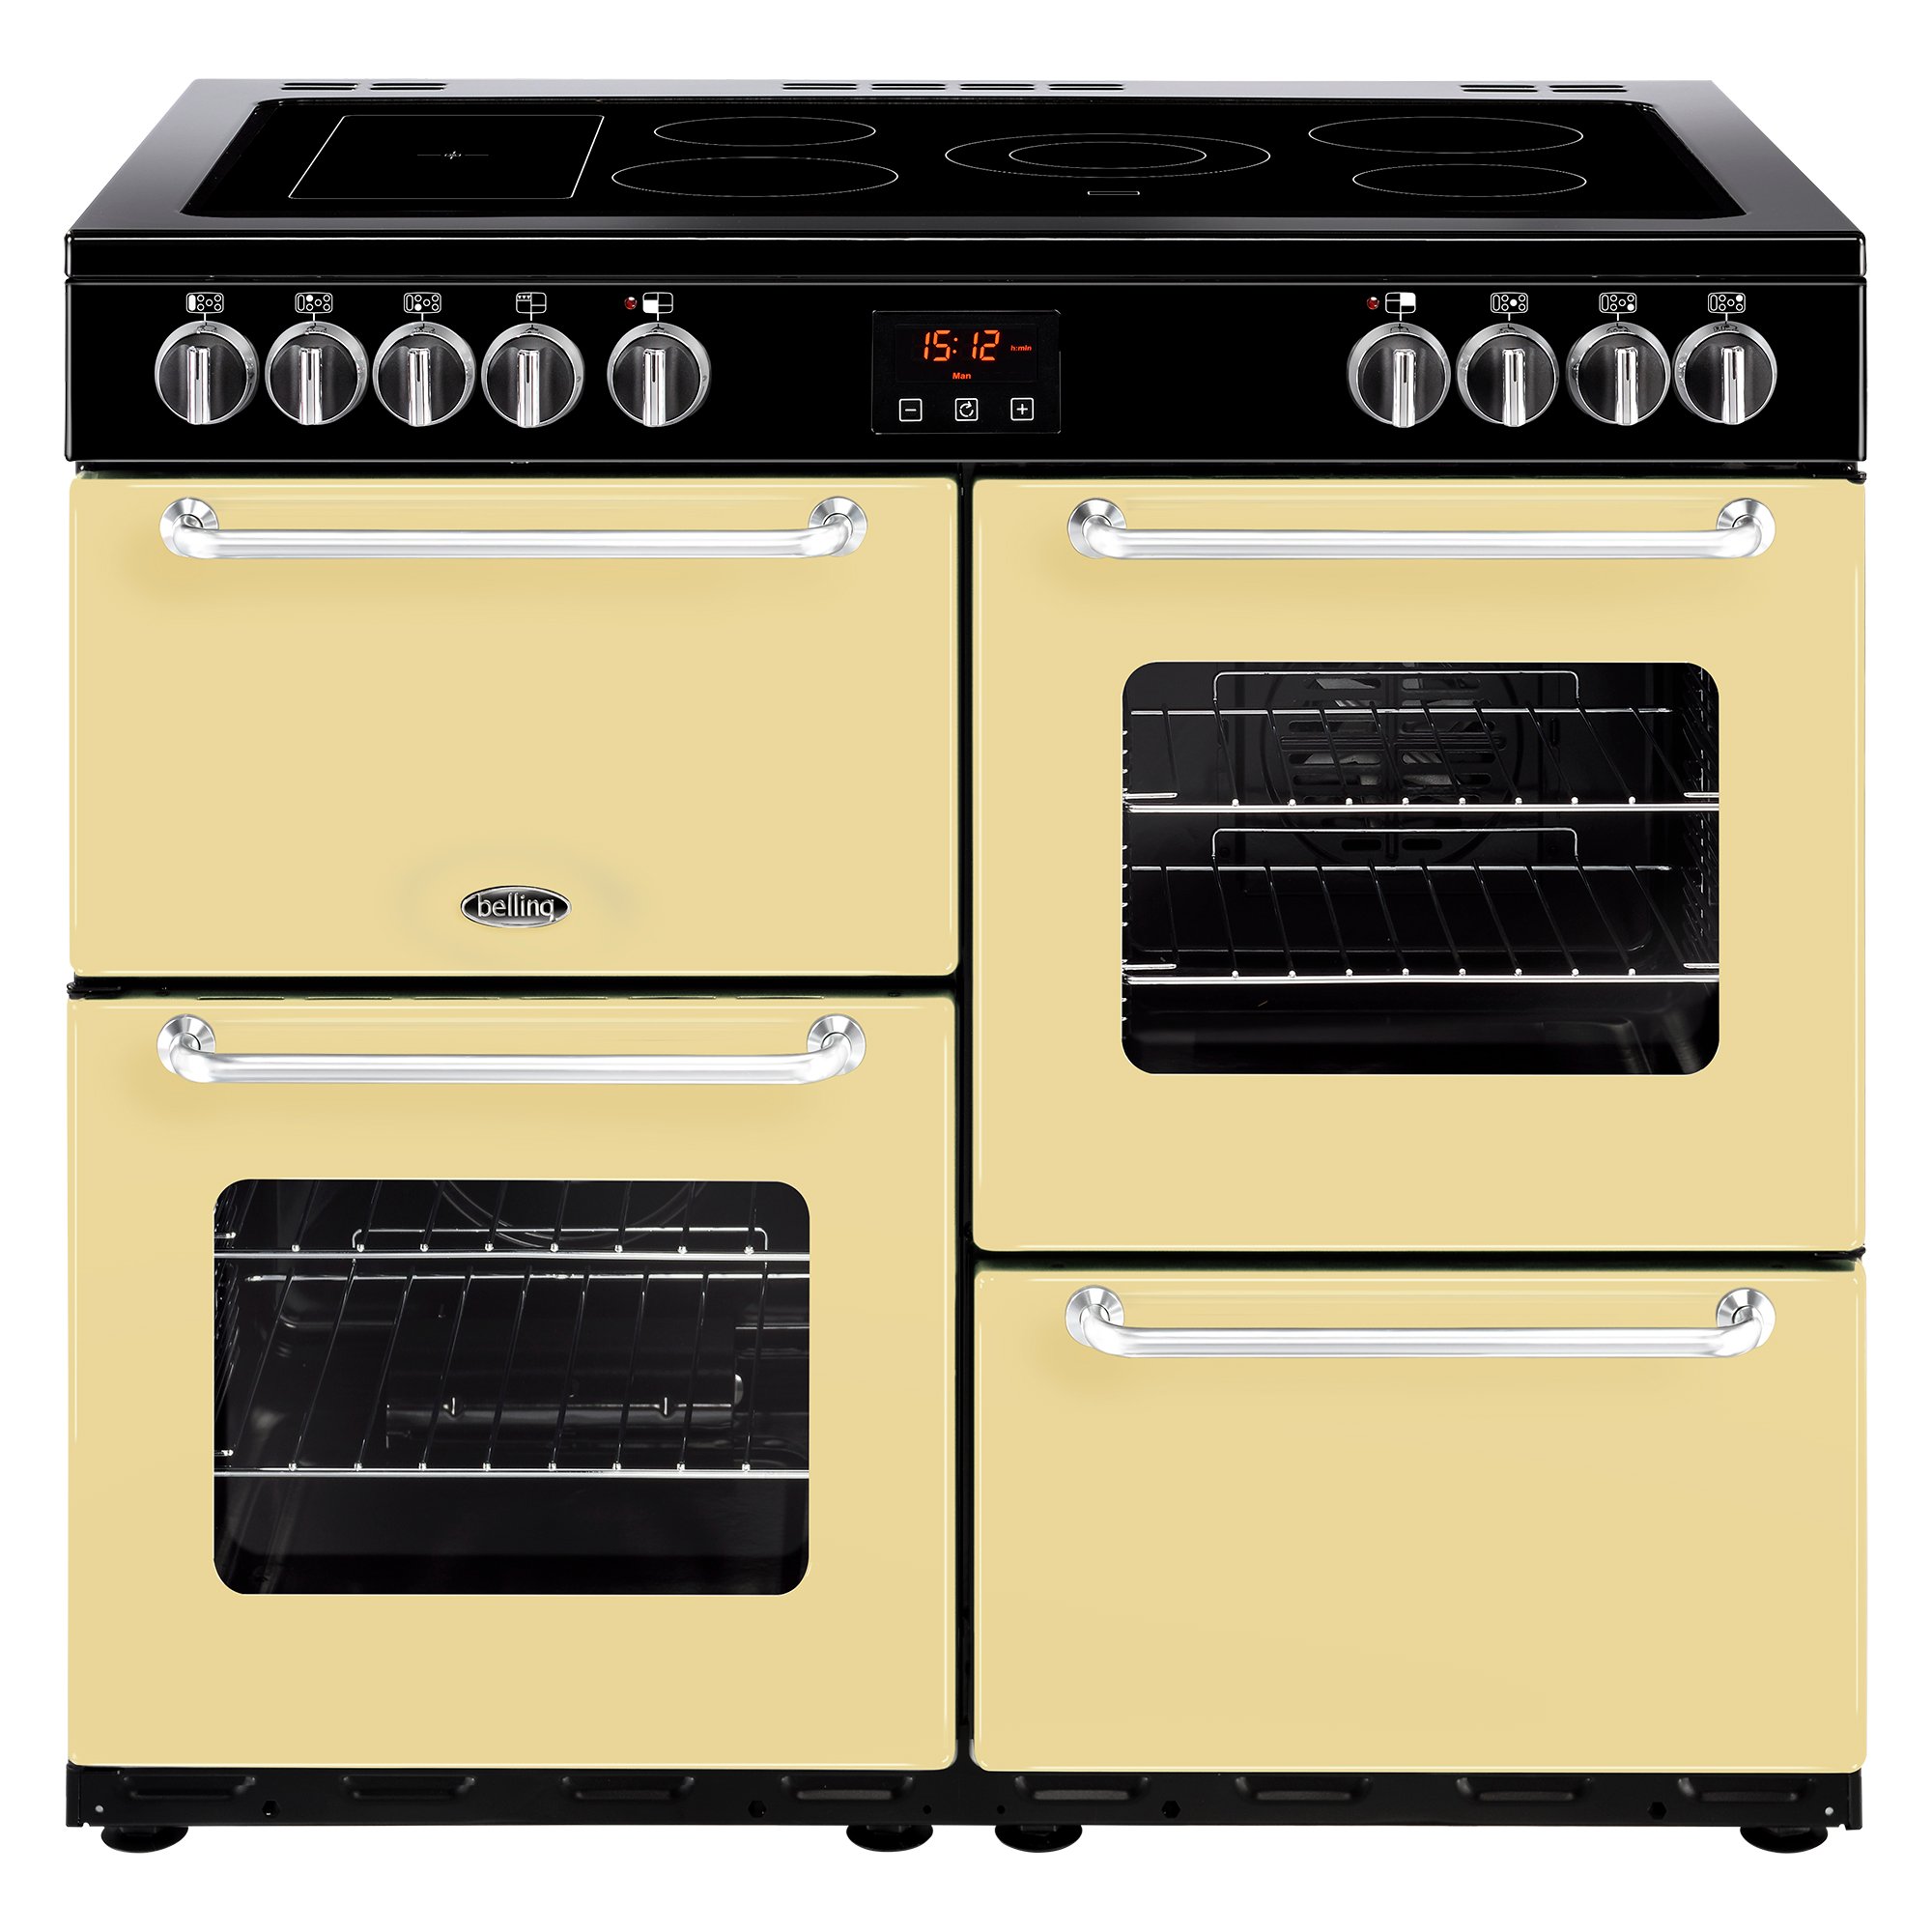 100cm electric range cooker with 5 zone ceramic hob and additional warming zone, variable rate electric grill, main fanned oven and a conventional second oven.